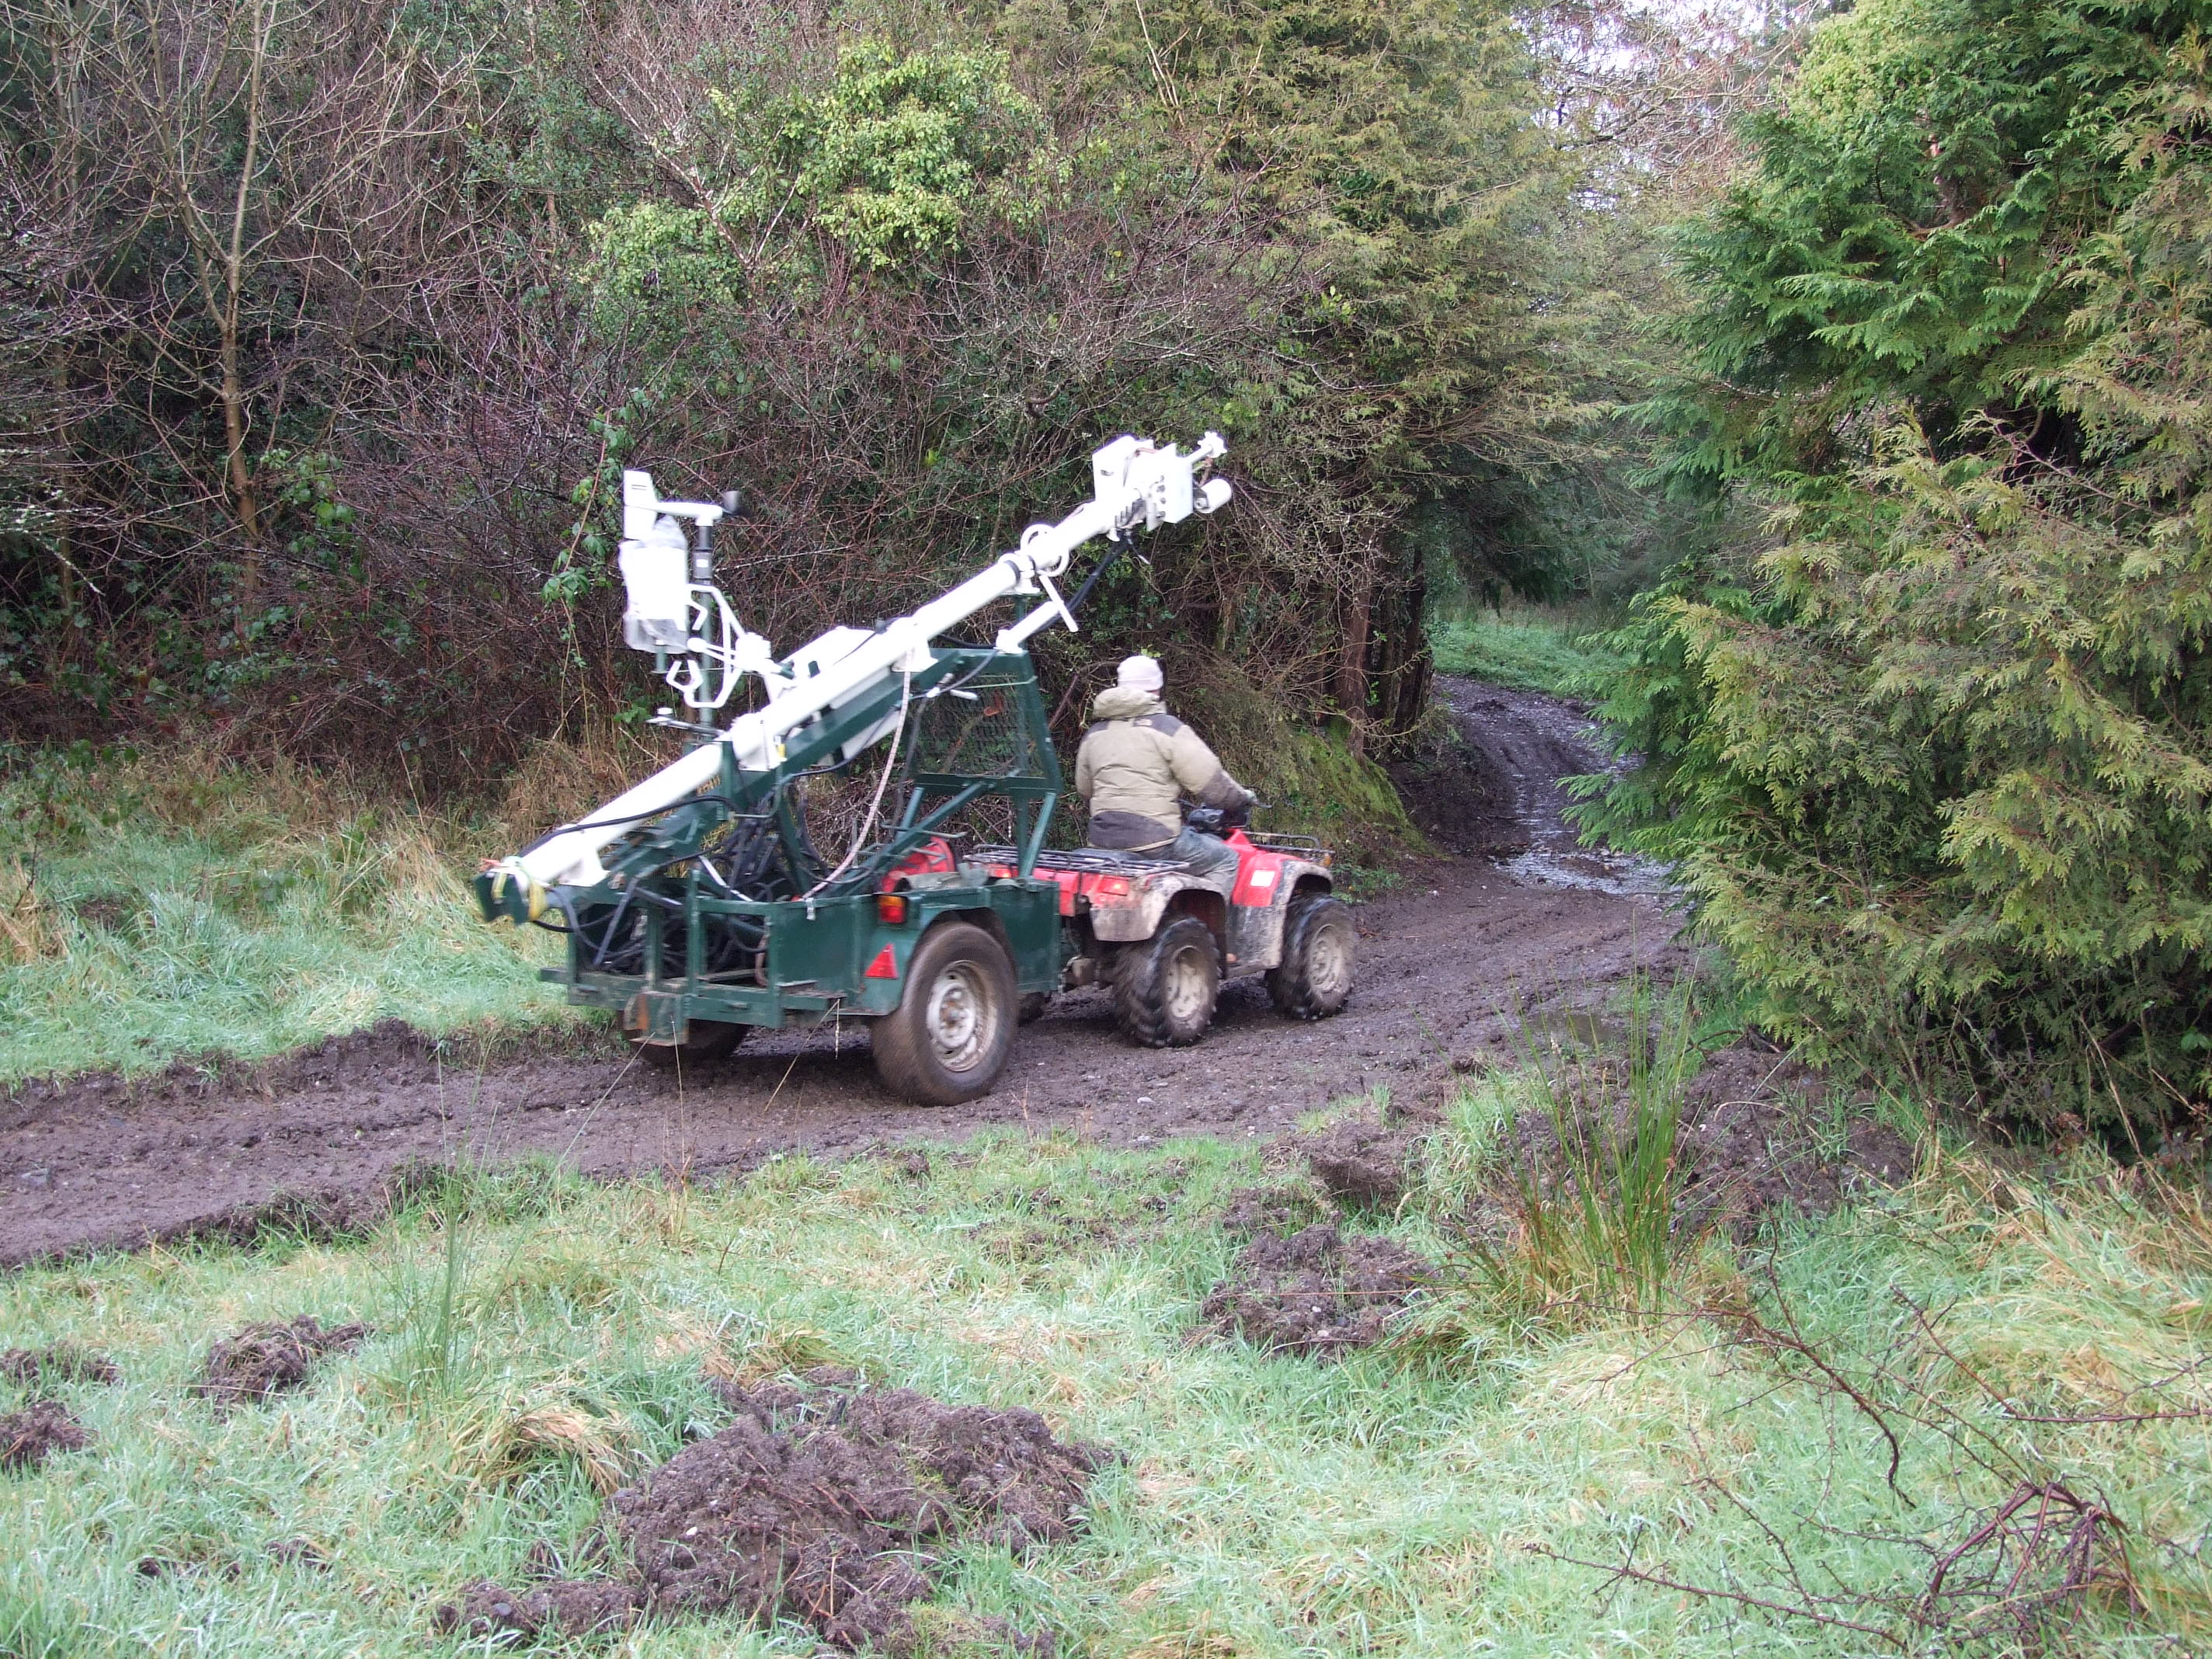 A quad was used to 'rove' the mobile mast between sites, spending a week in each.